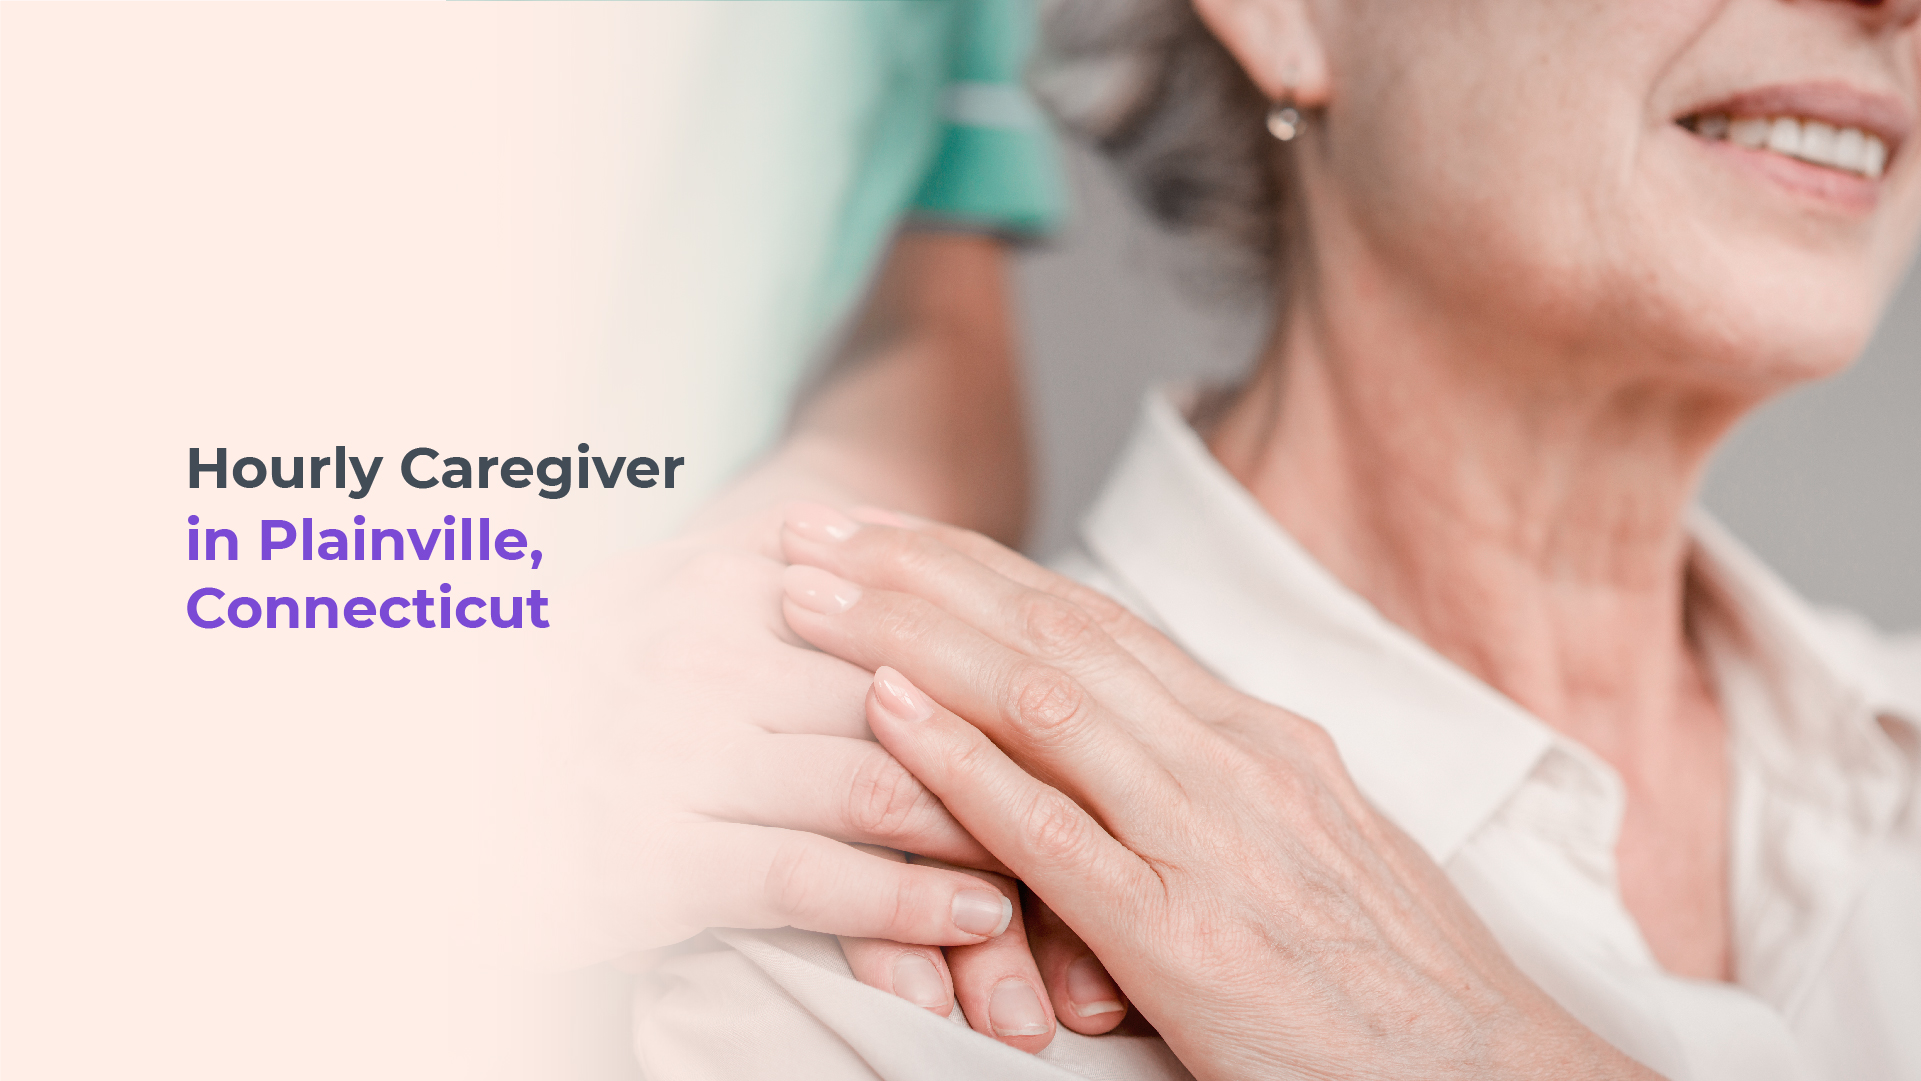 Hourly Caregivers in Plainville Connecticut